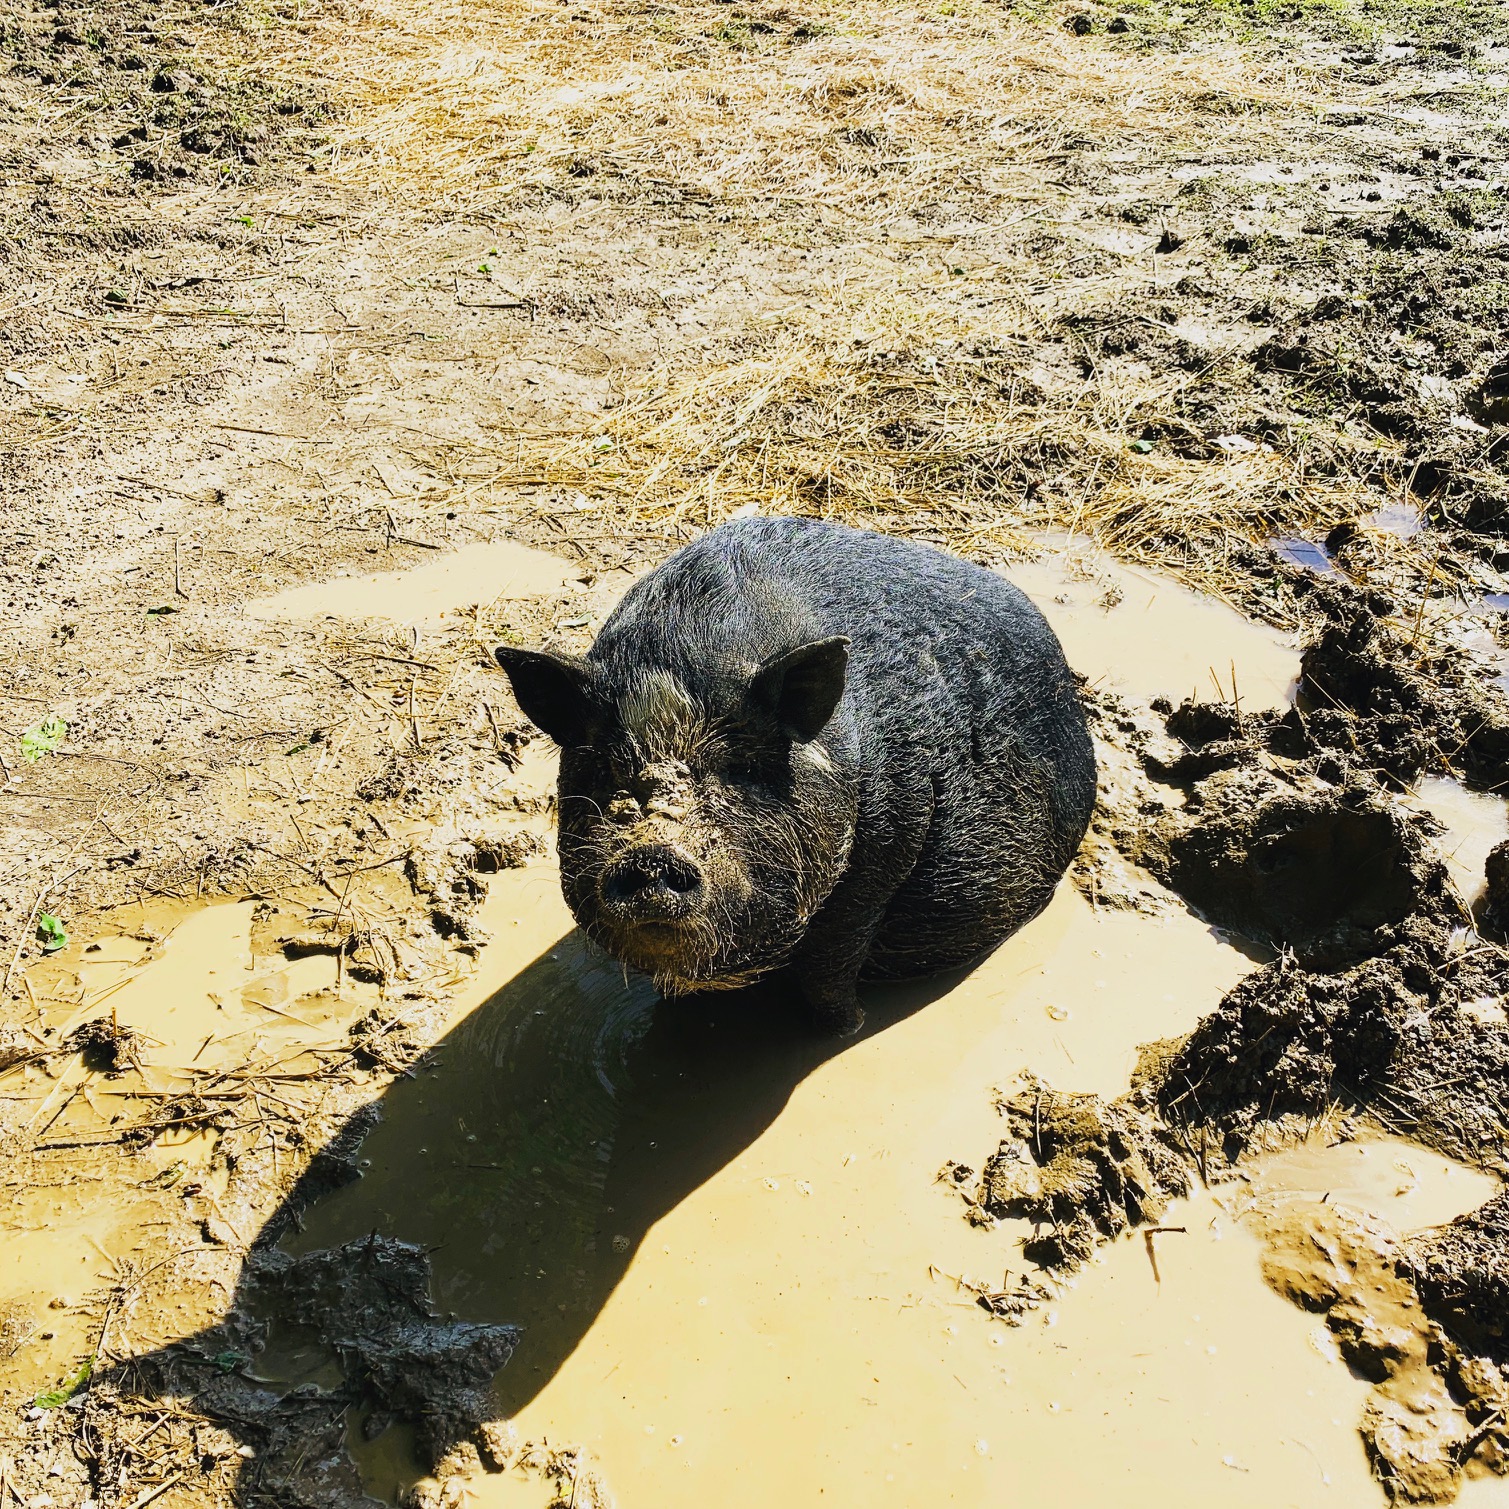 Petunia cools off in a mud puddle.